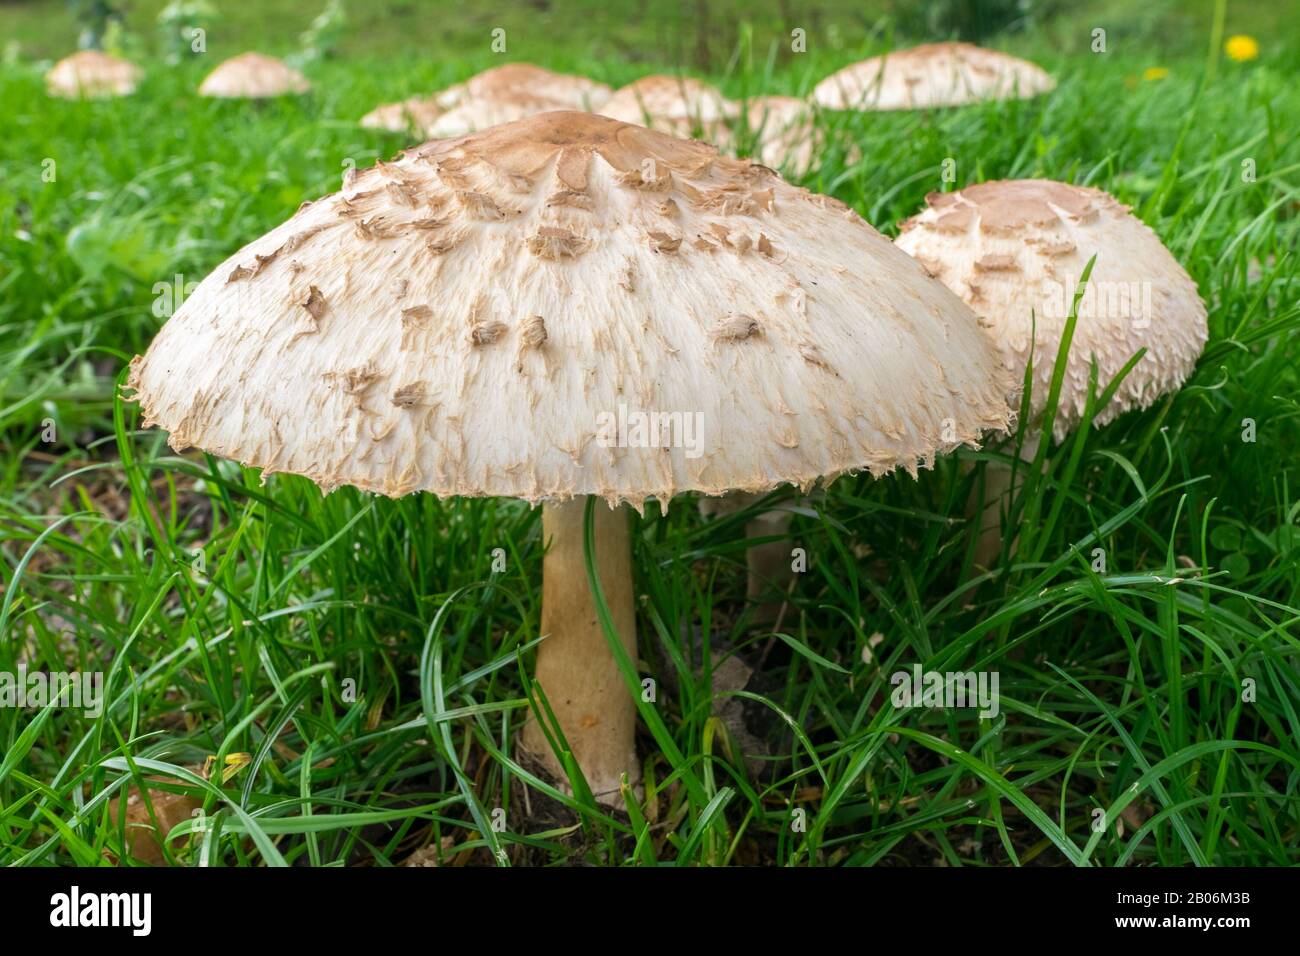 Large parasol mushroom with wide cap in a park Stock Photo